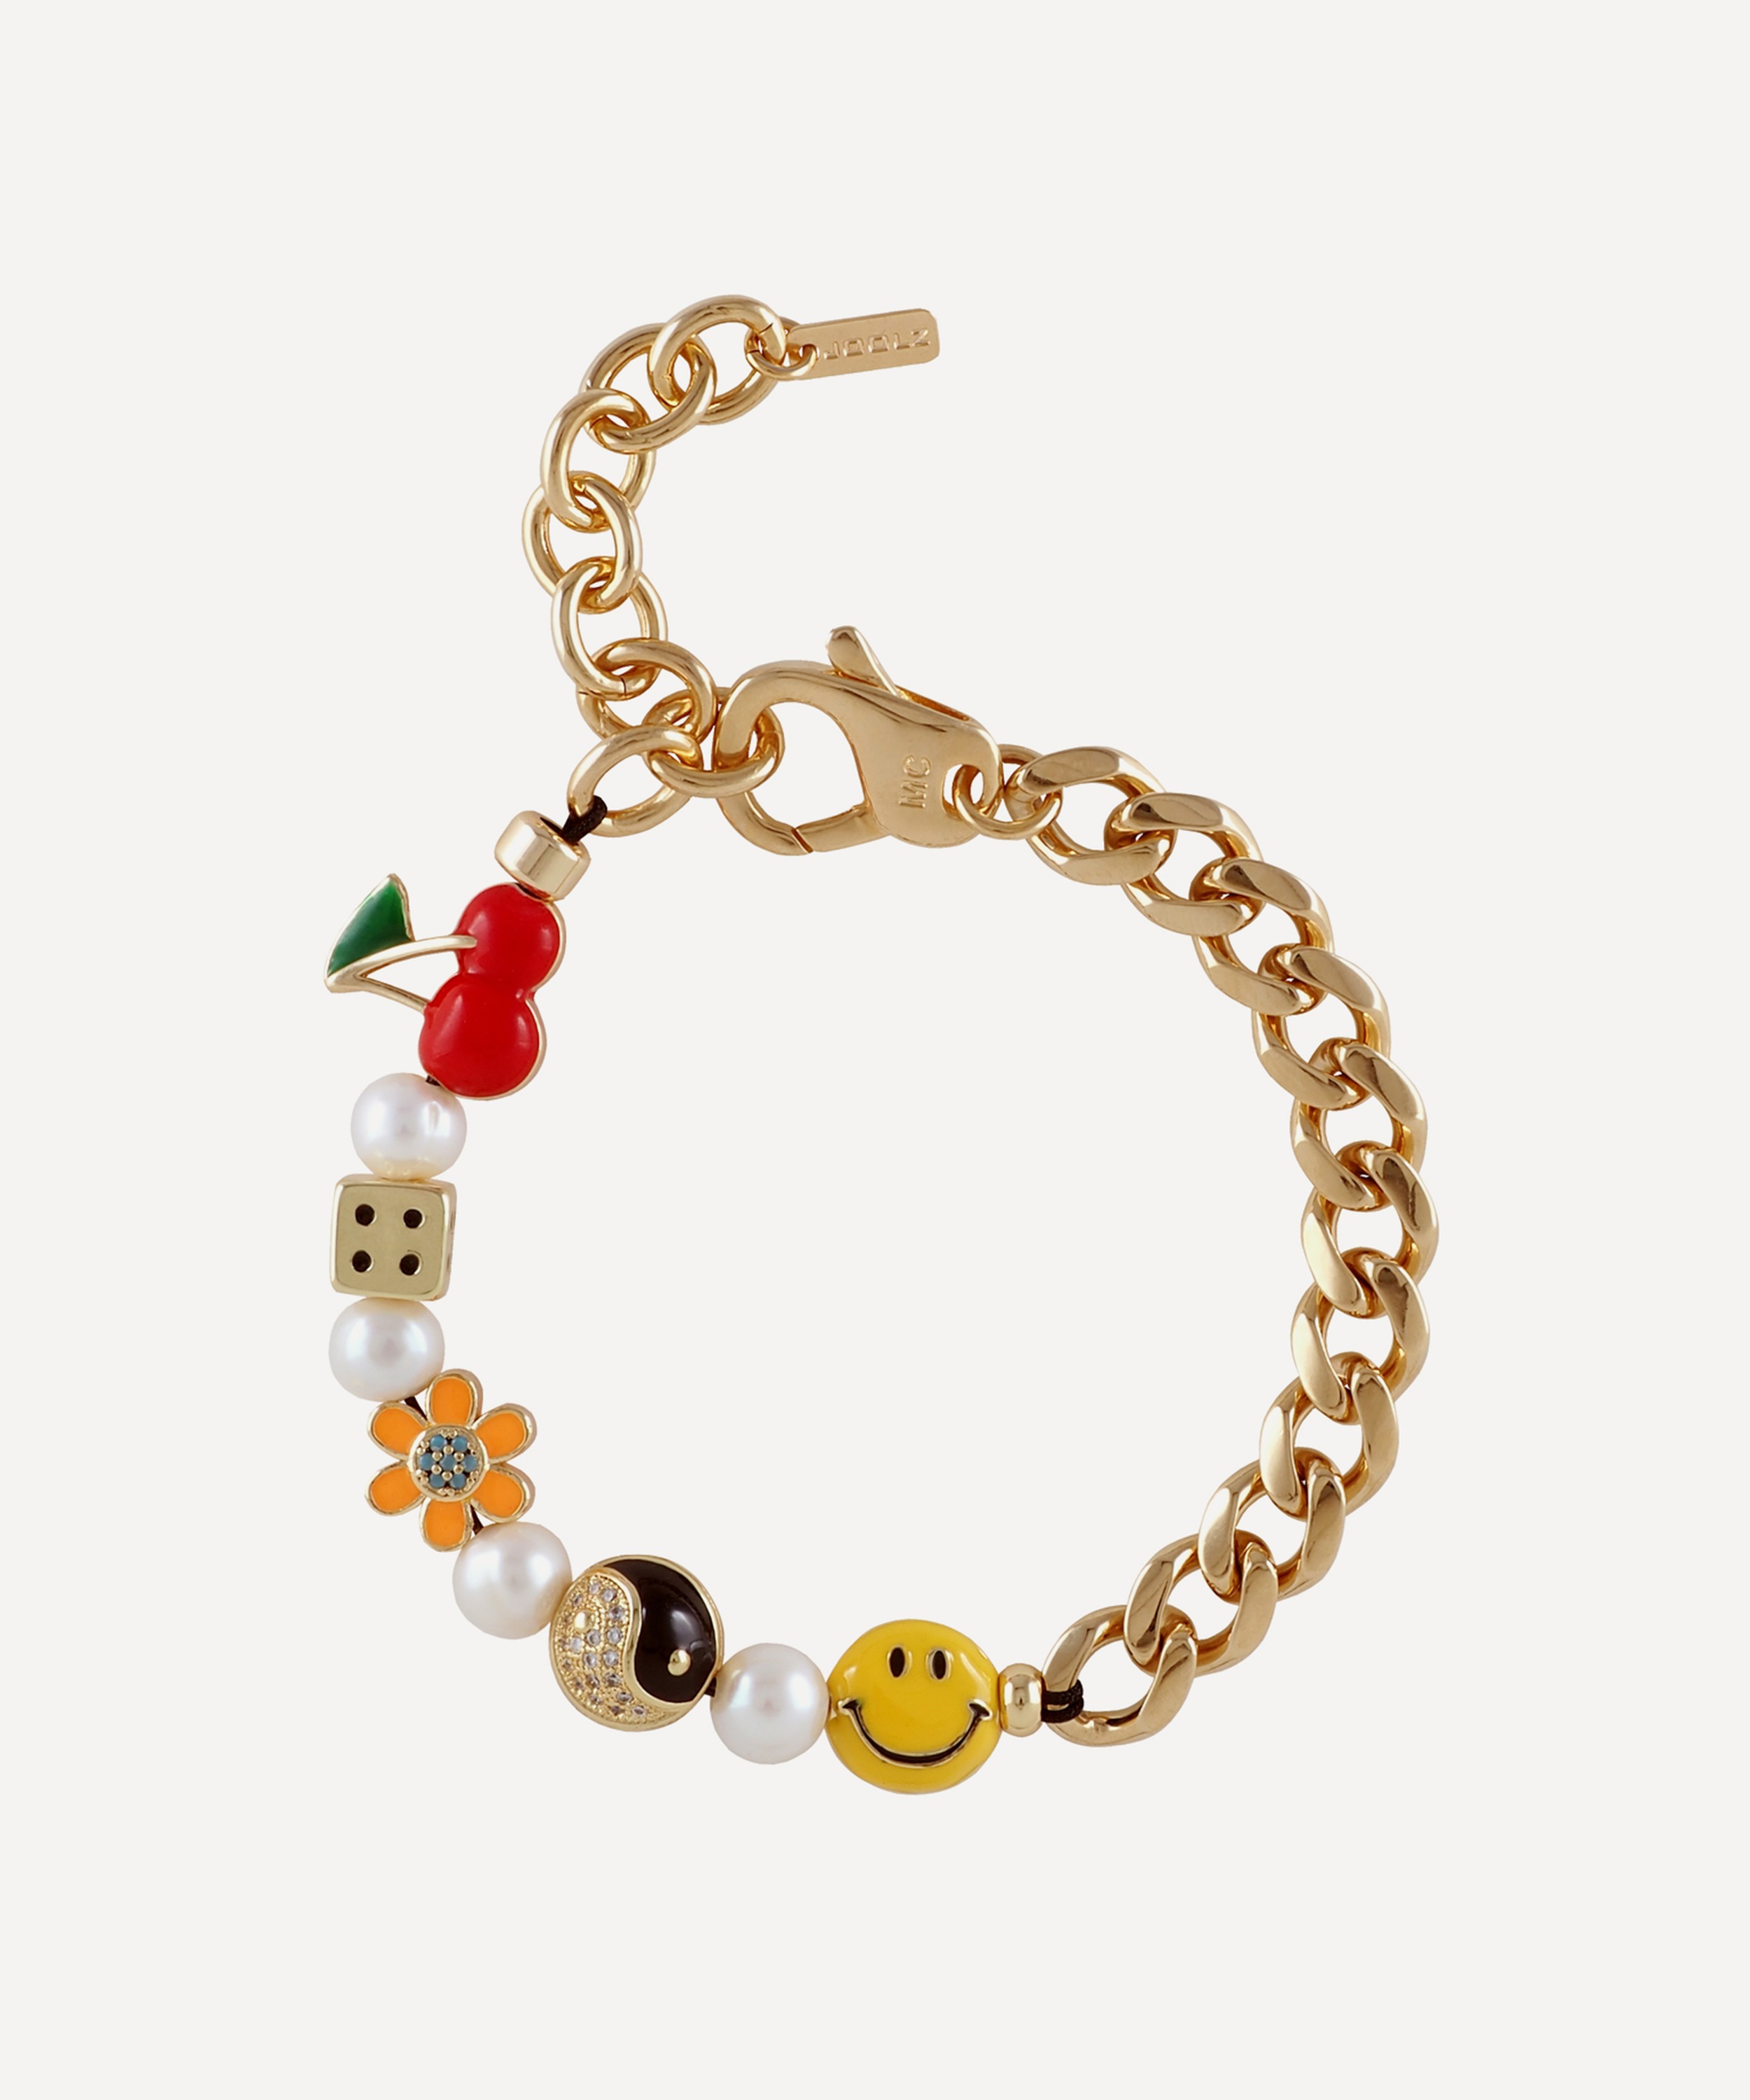 Martha Calvo - 14ct Gold-Plated Showstopper Half Chain and Charms Bracelet